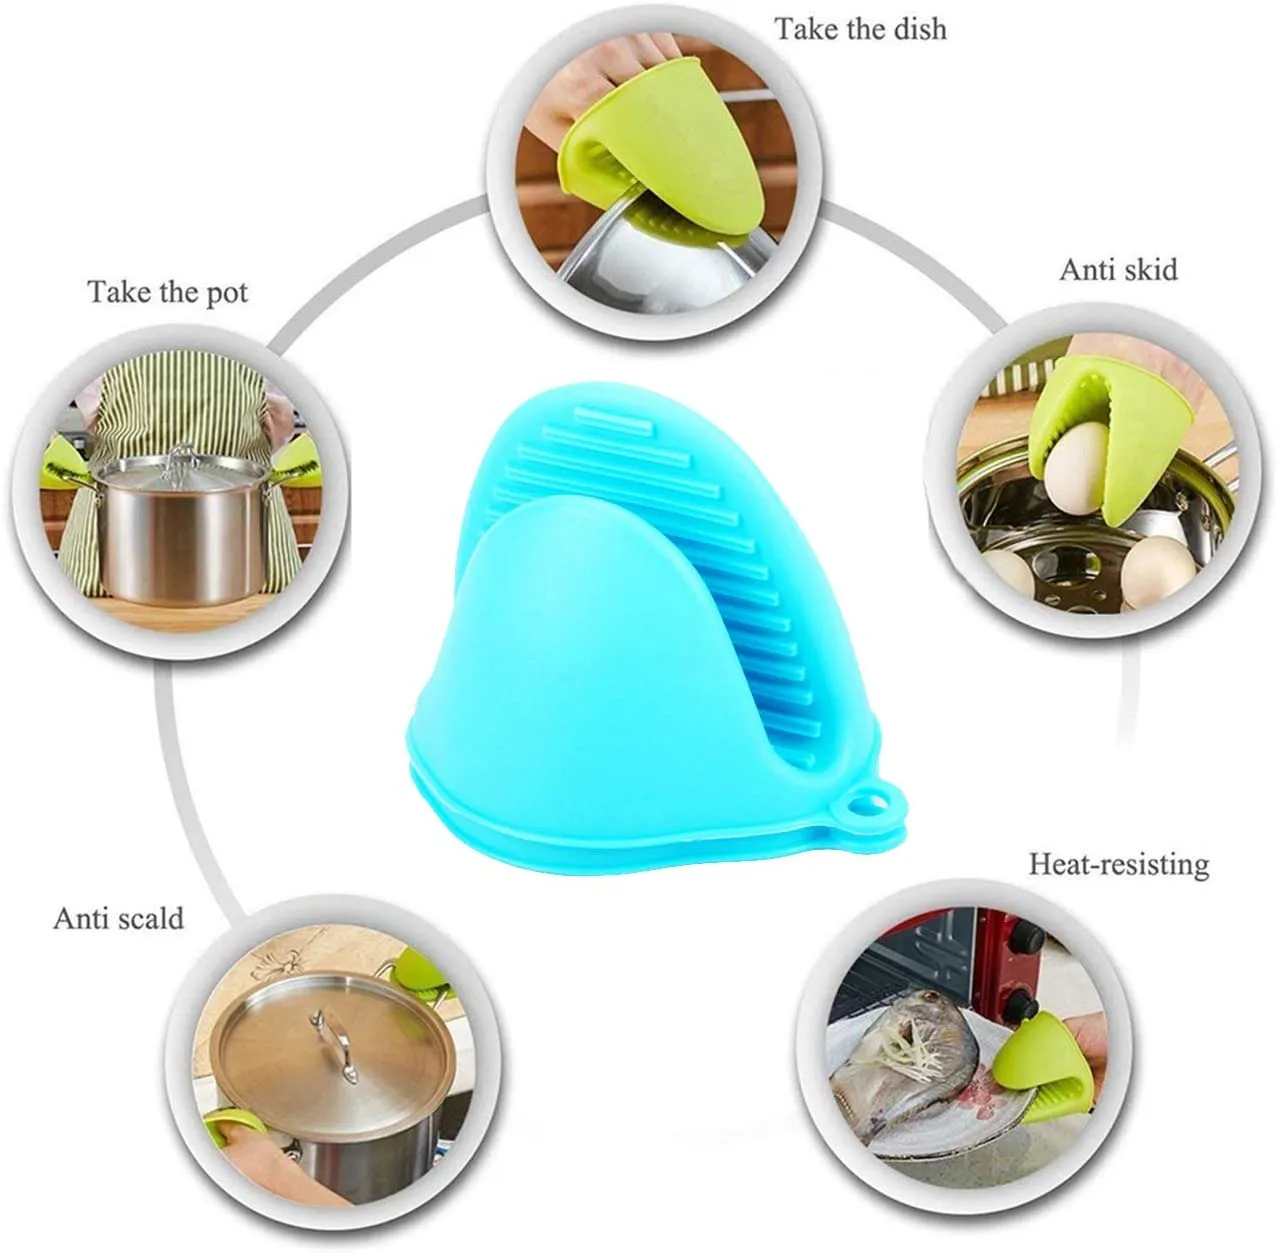 Home Mini Oven Mitts Silicone Heat Resistant Cooking Pinch Mitts Finger Protector Pot Holder for Kitchen Cooking Baking home tools